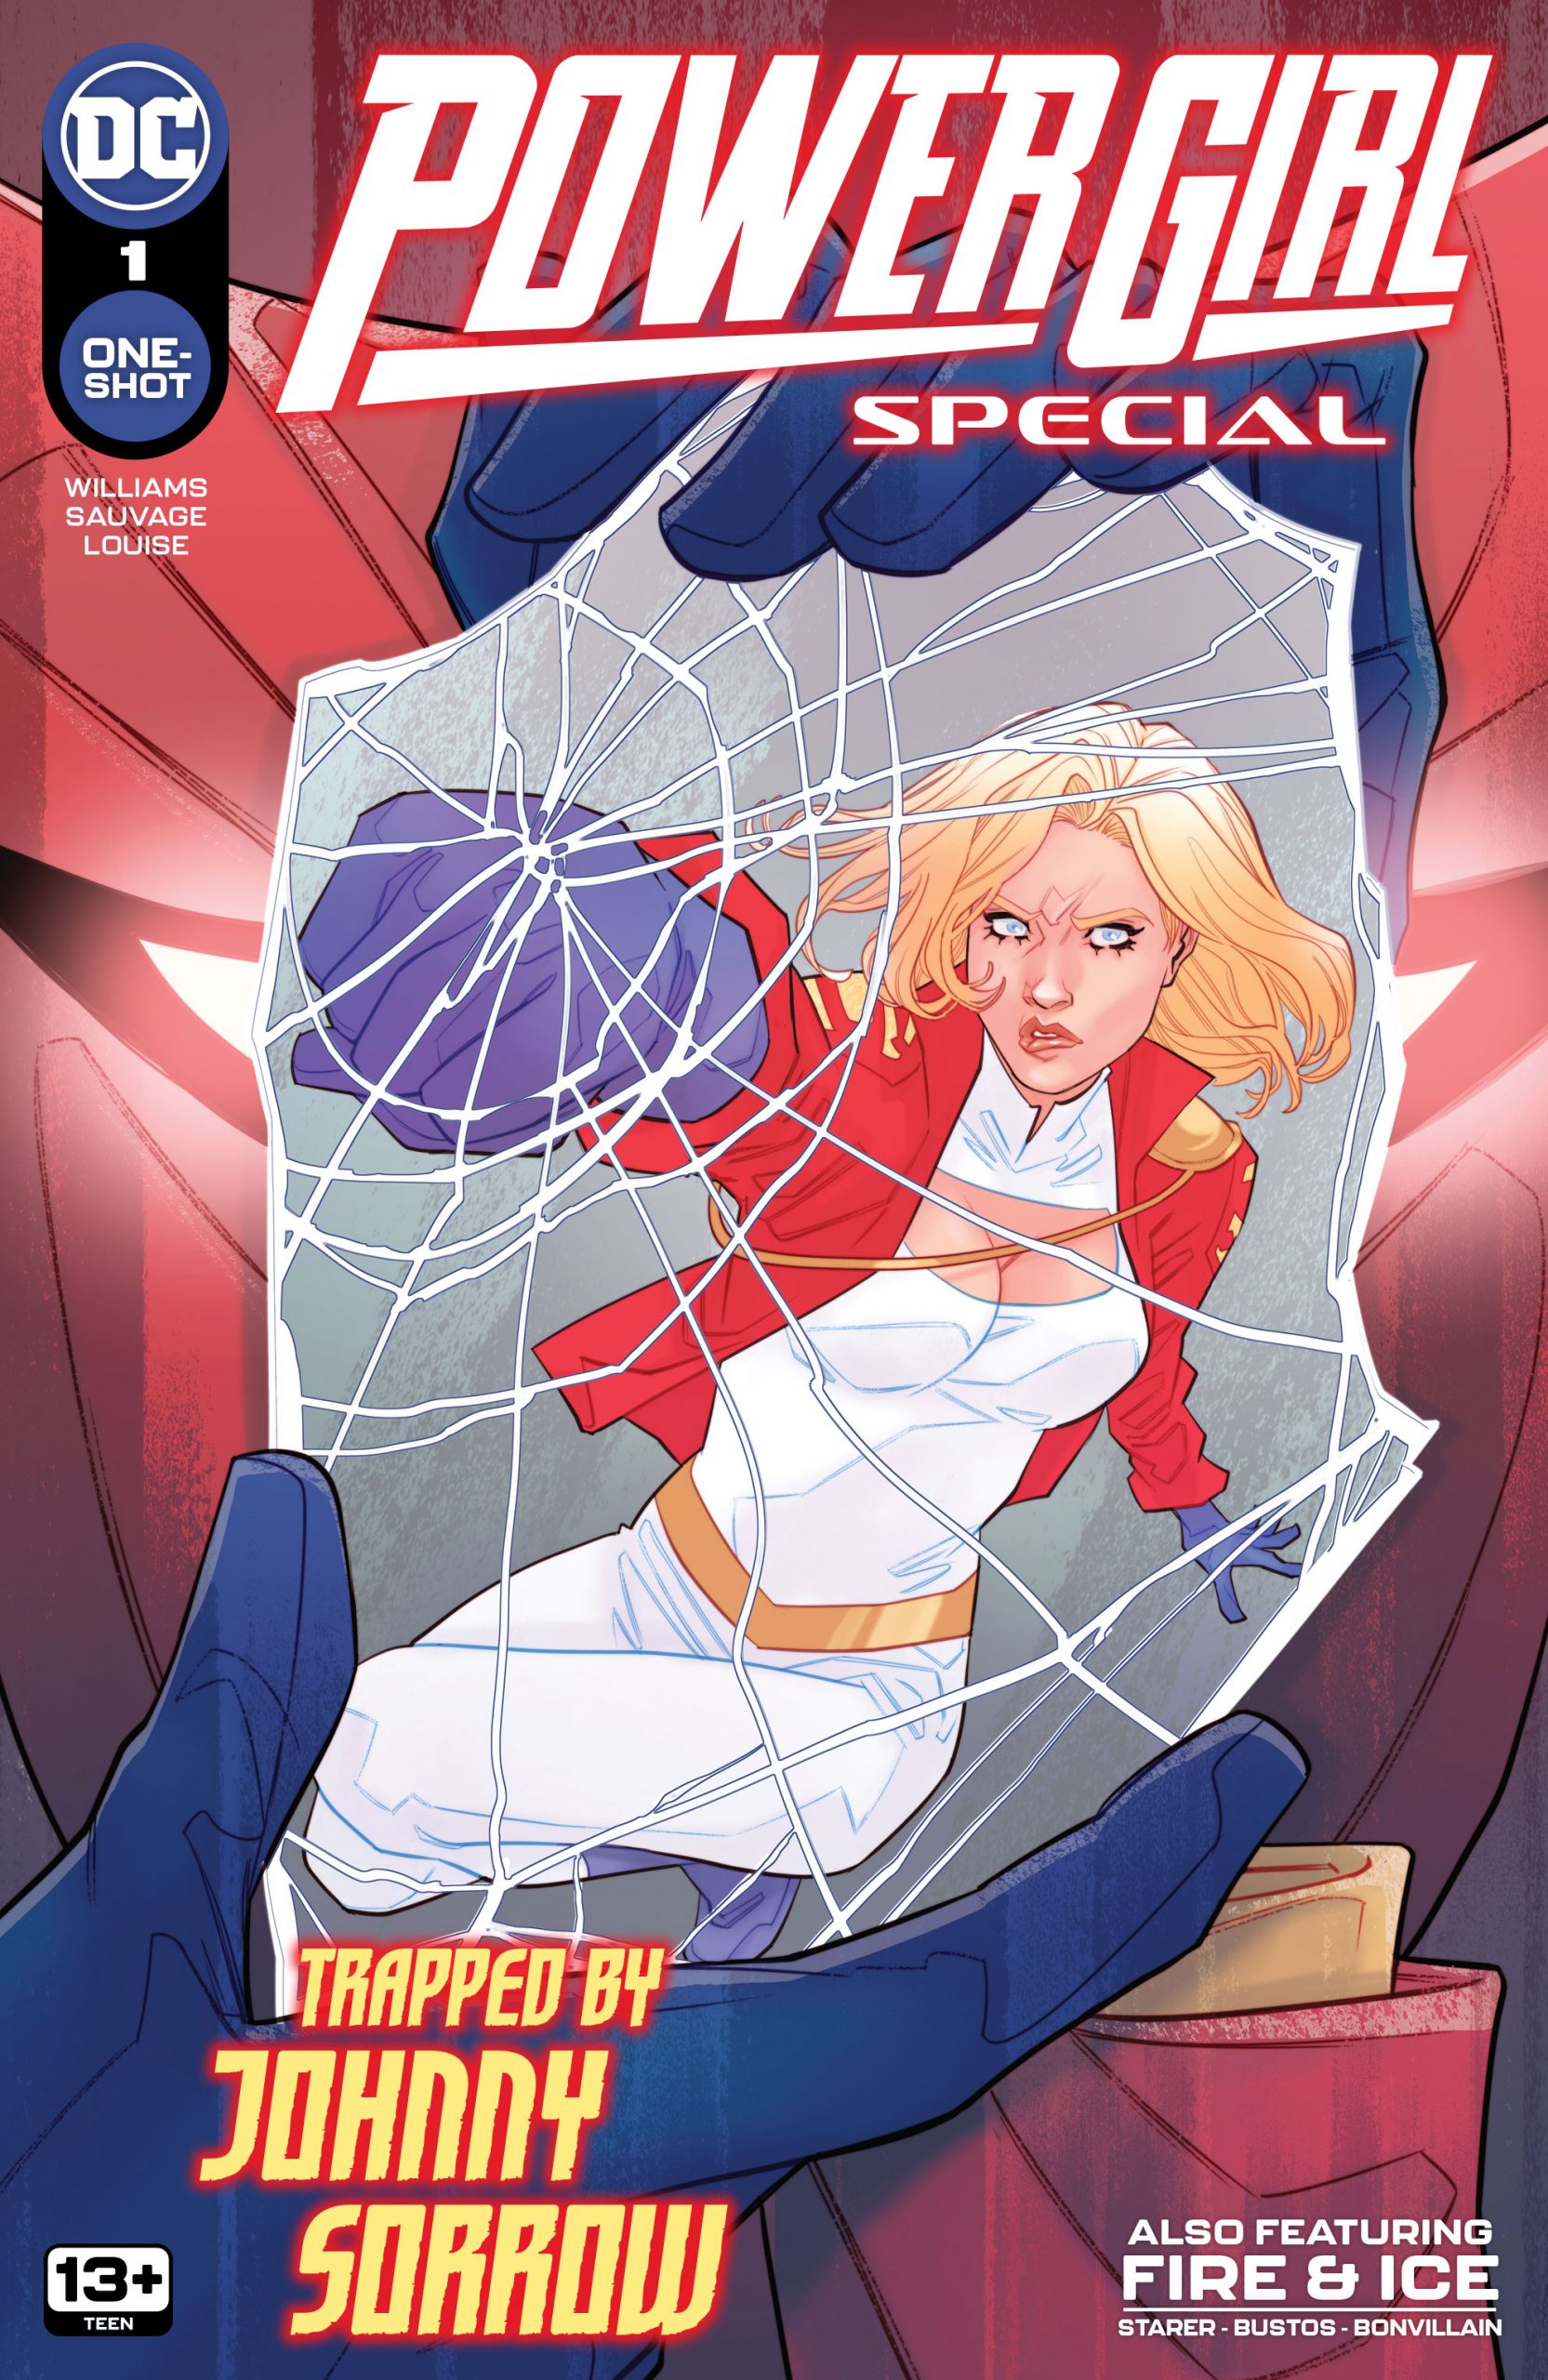 DC Preview: Power Girl Special #1